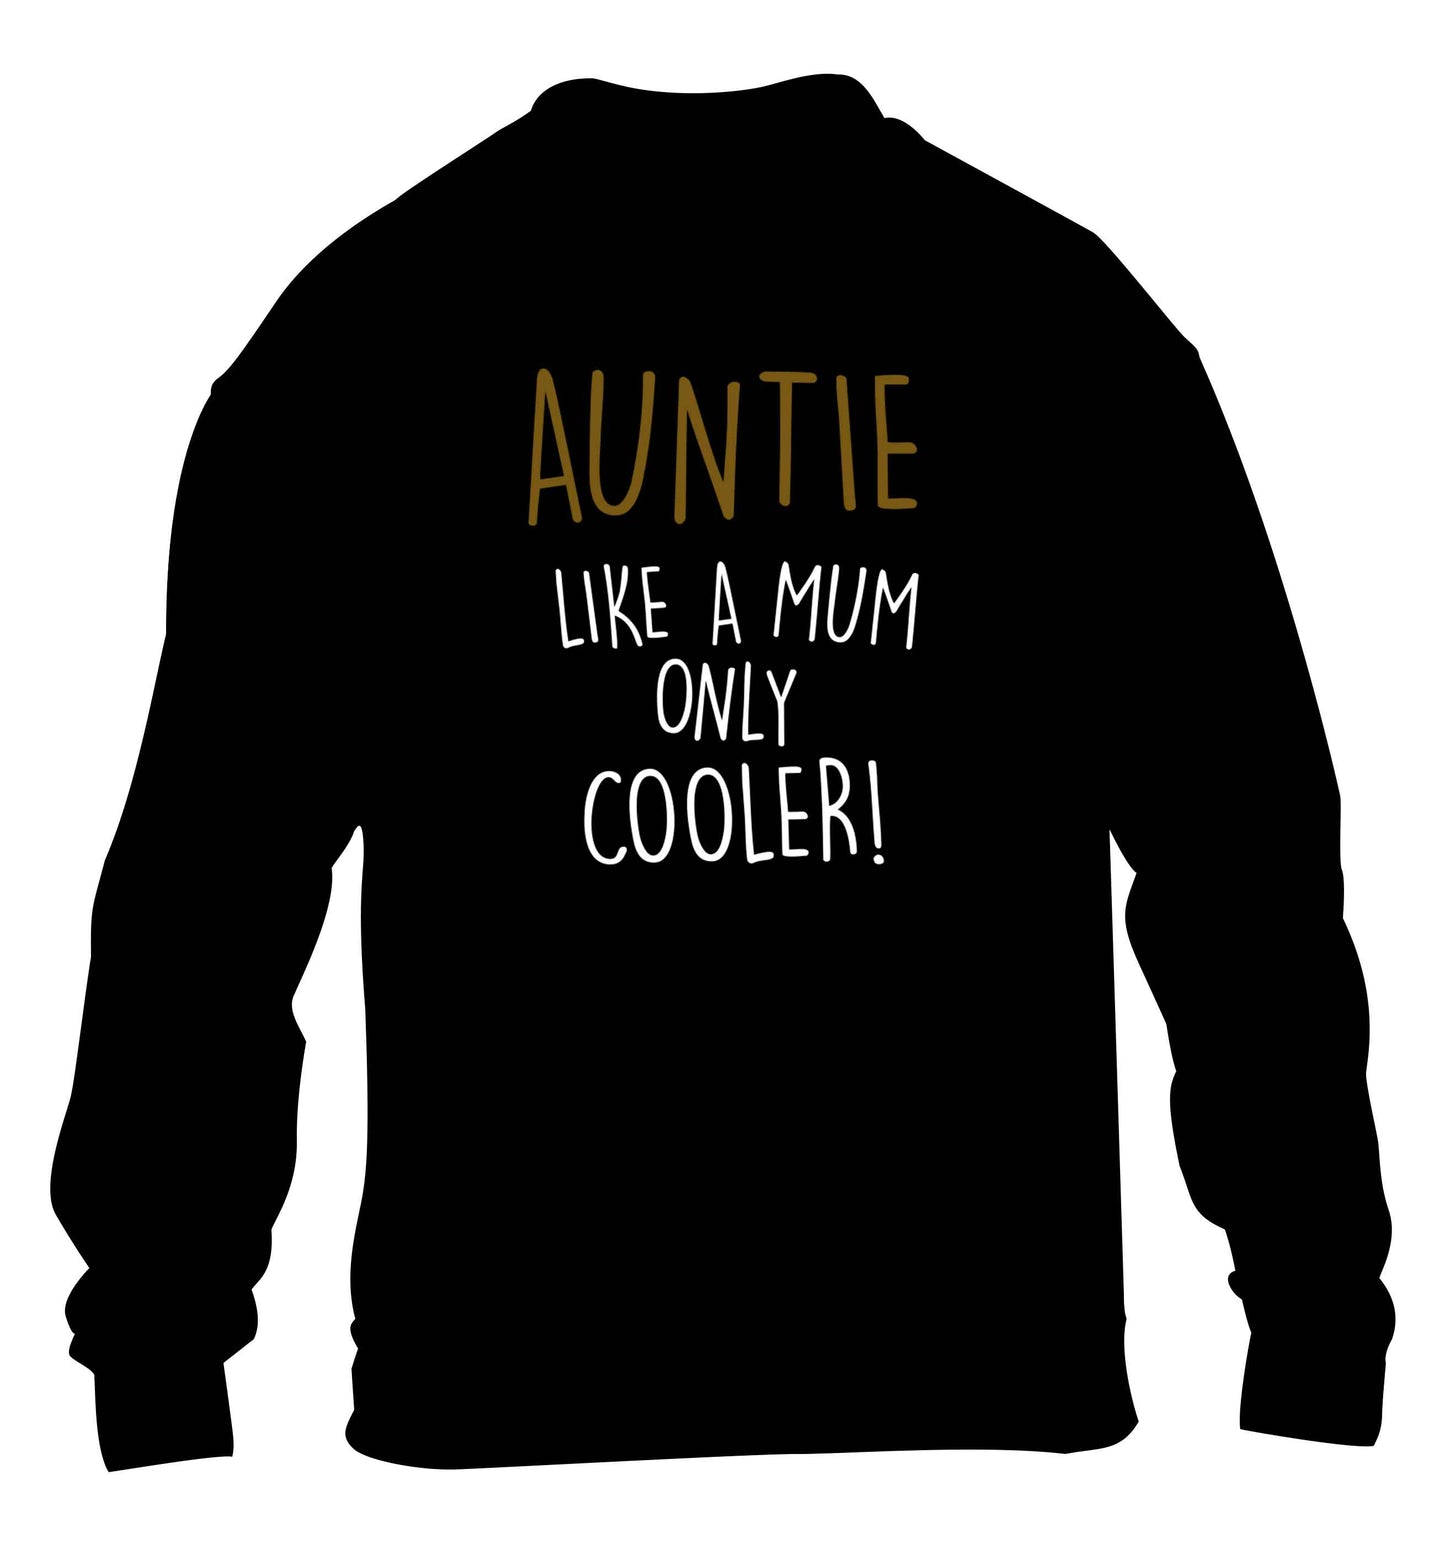 Auntie like a mum only cooler children's black sweater 12-13 Years